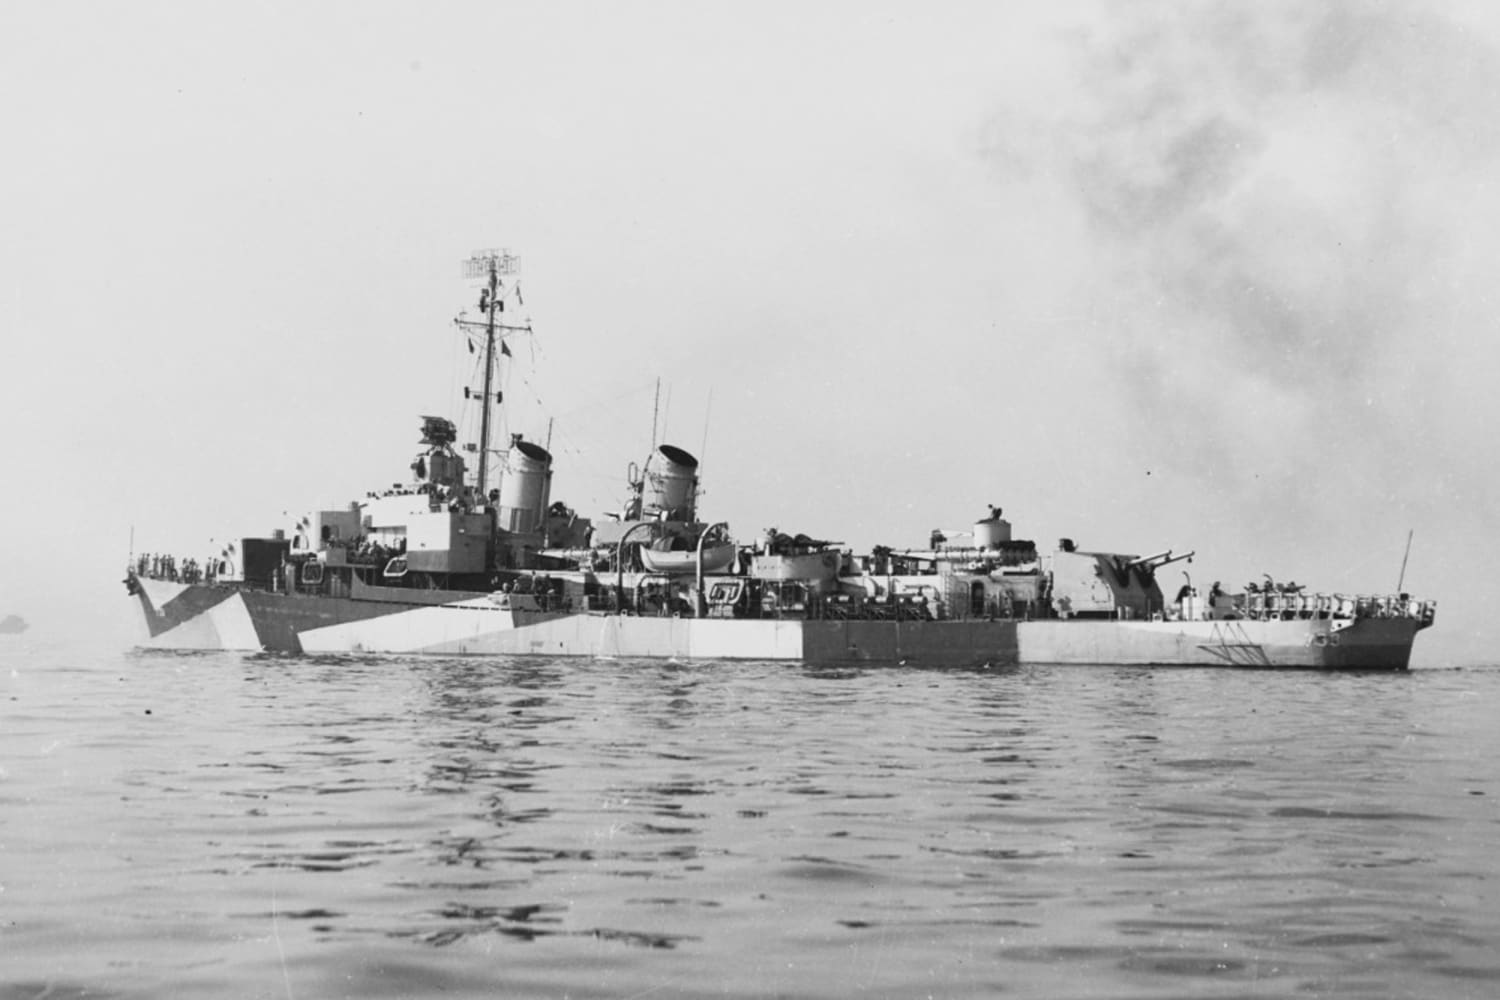 U.S. Navy destroyer sunk in WWII discovered off the Japanese coast